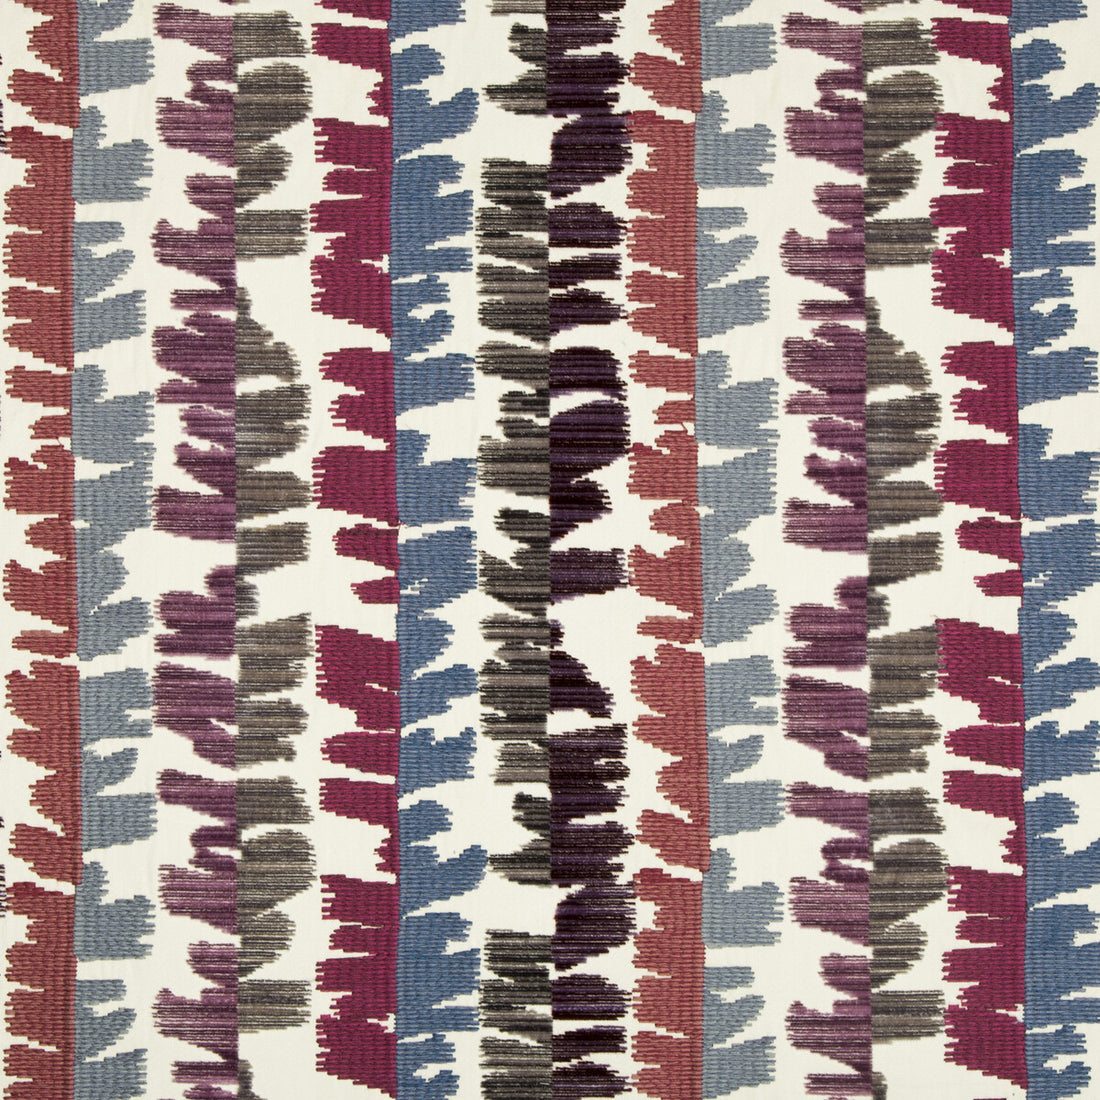 Fractal Velvet fabric in mauve/grey color - pattern GWF-3709.1011.0 - by Lee Jofa Modern in the Prism collection